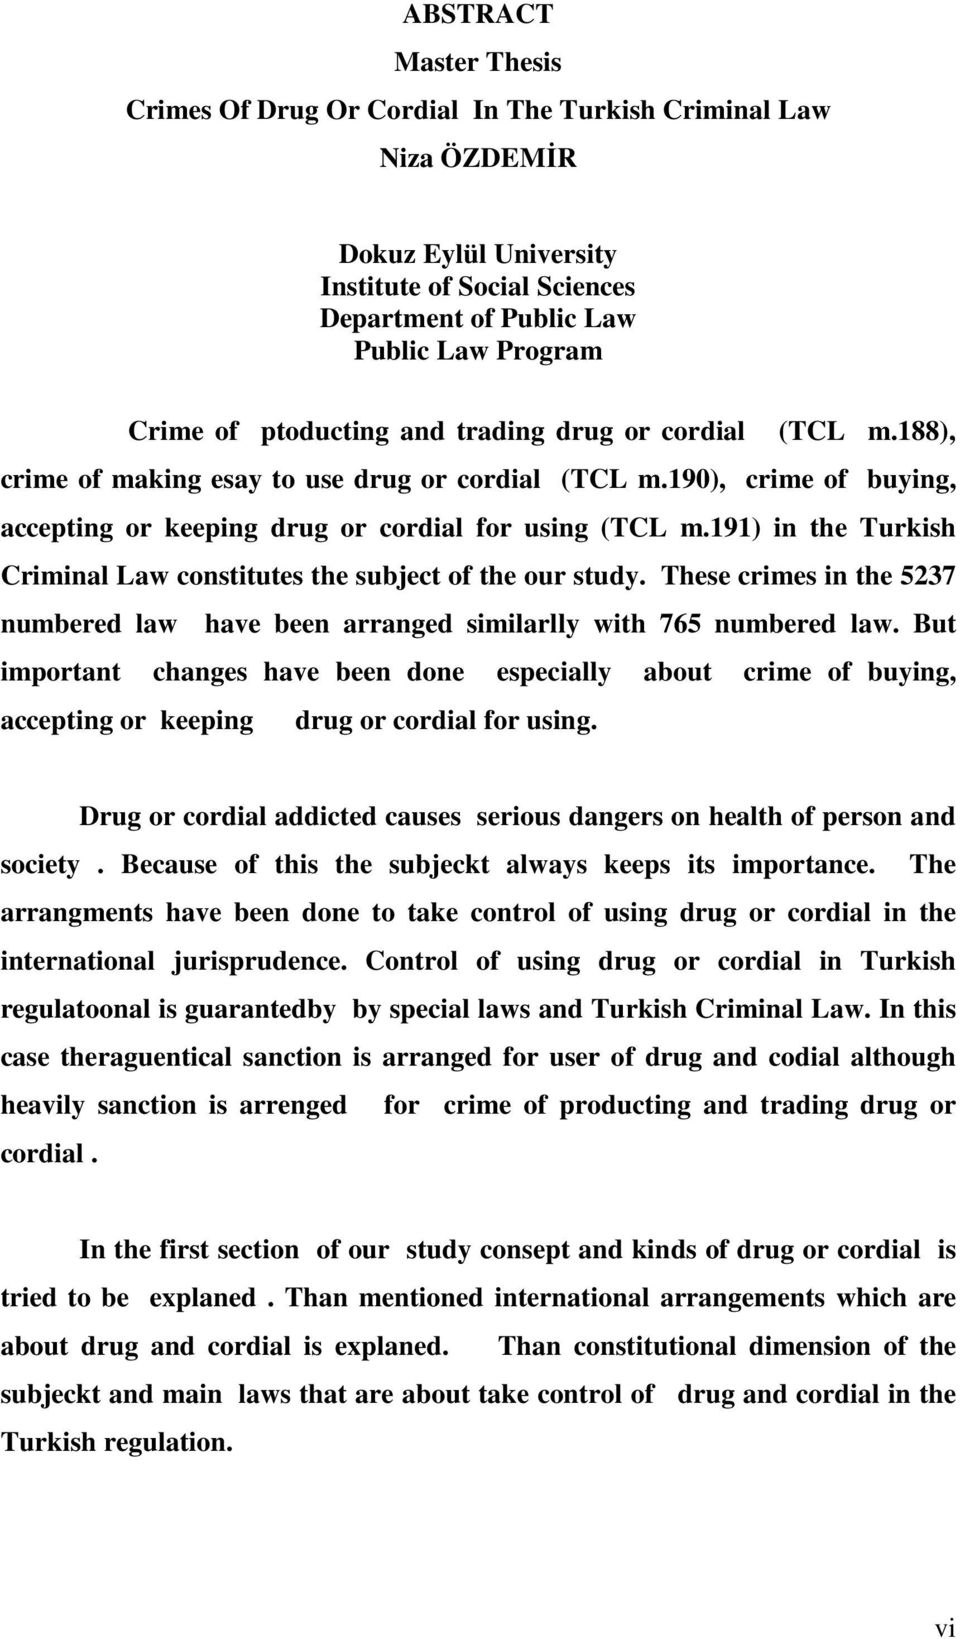 191) in the Turkish Criminal Law constitutes the subject of the our study. These crimes in the 5237 numbered law have been arranged similarlly with 765 numbered law.